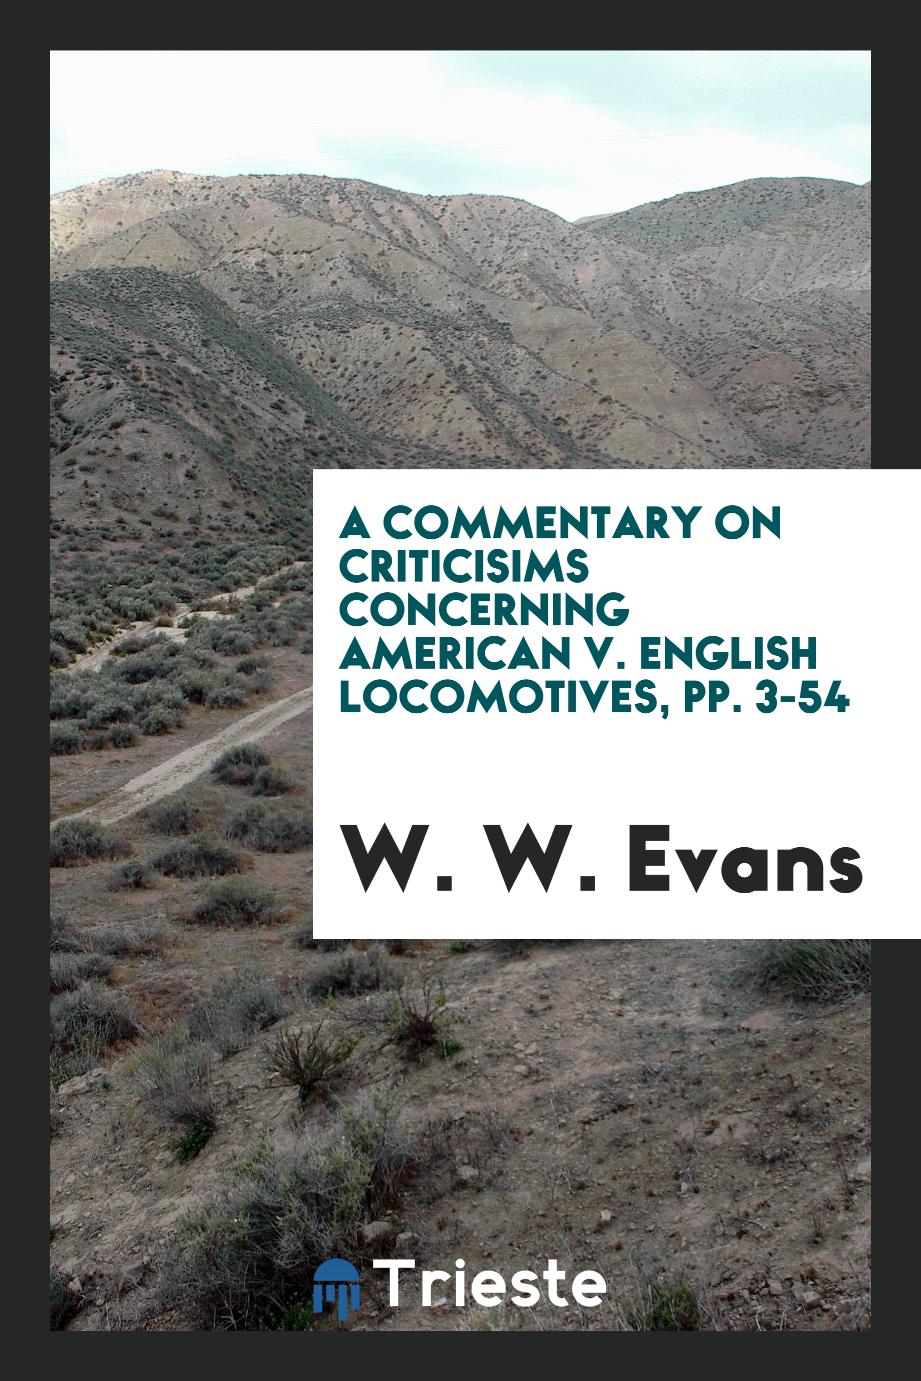 A Commentary on Criticisims Concerning American V. English Locomotives, pp. 3-54